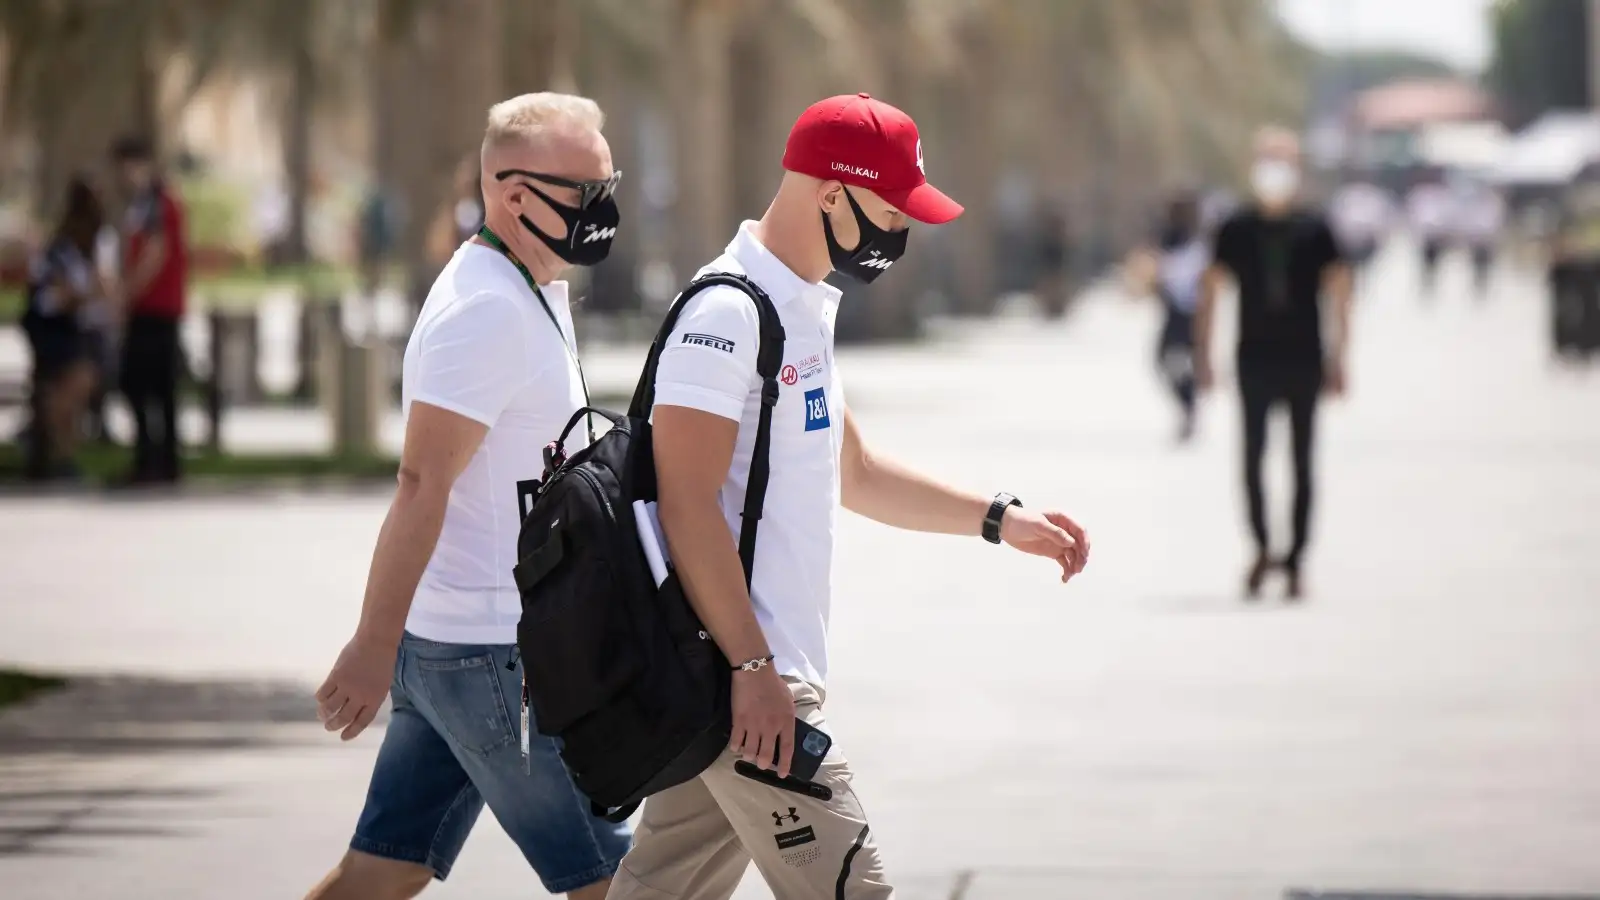 Dmitry Mazepin and Nikita Mazepin in the paddock. Bahrain, March 2021.